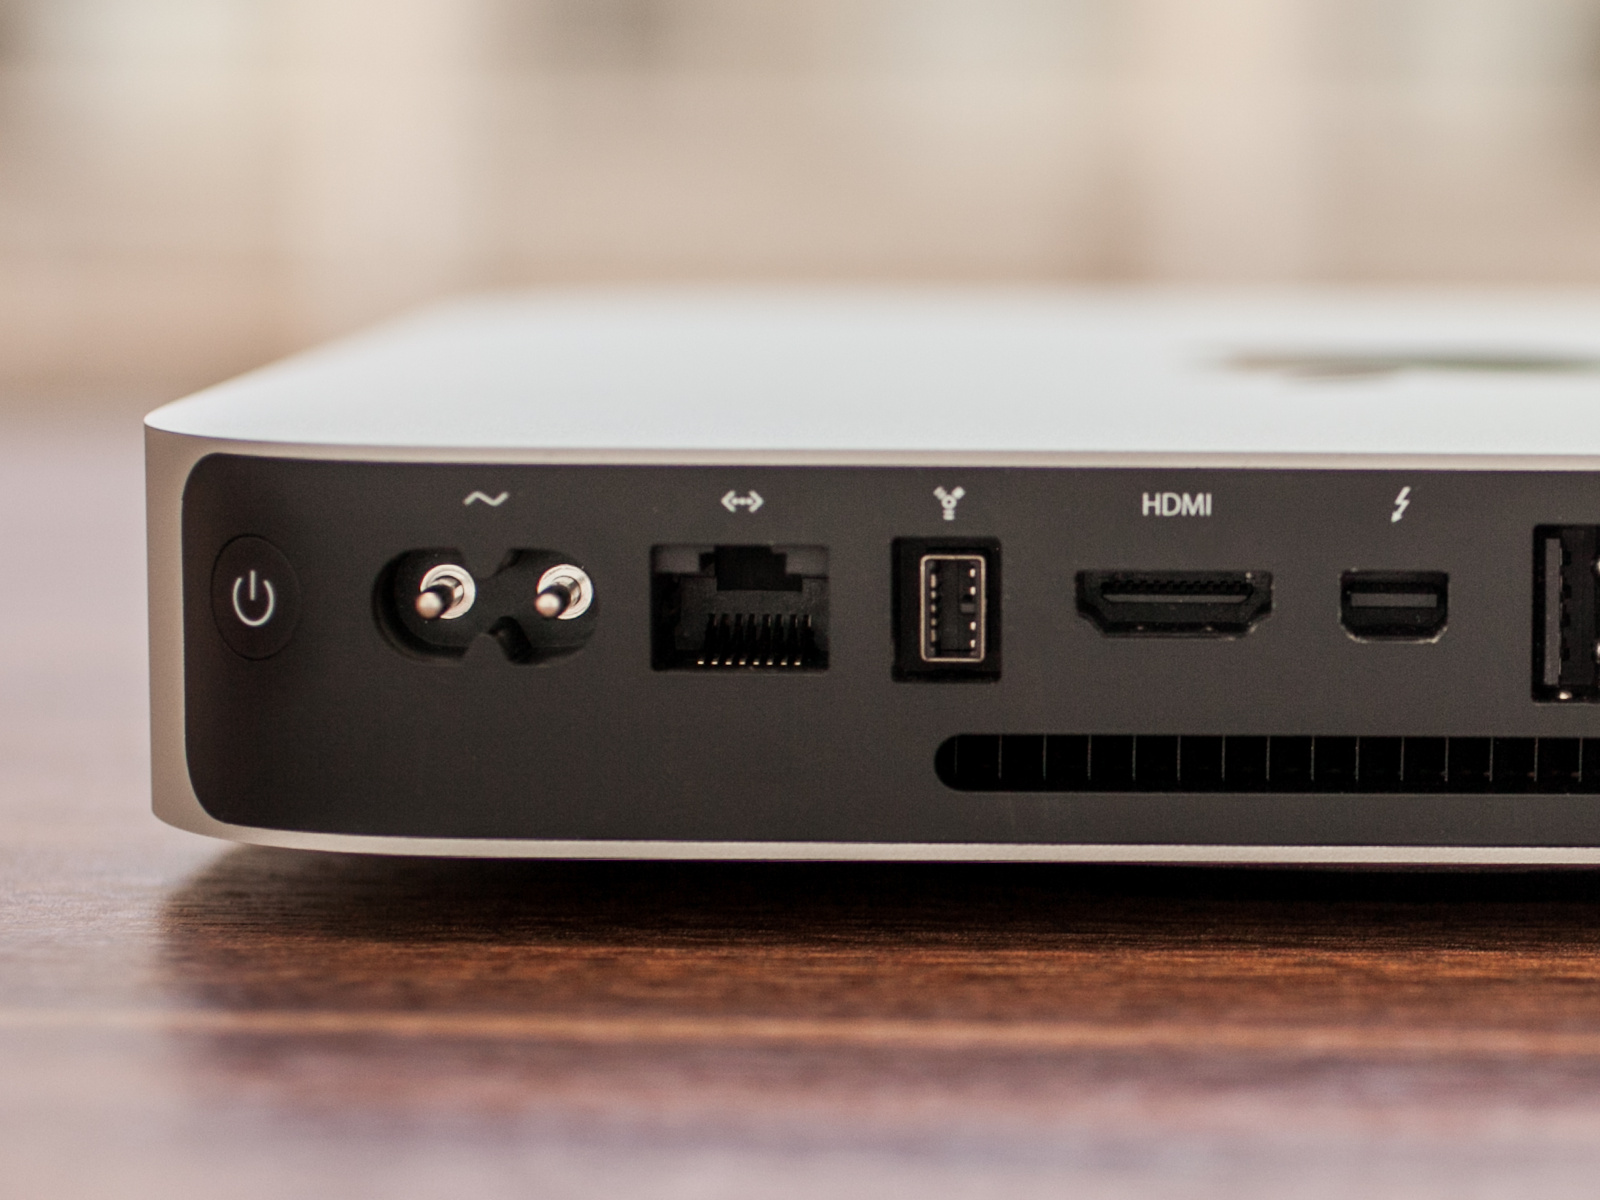 solid state harddrive for 2012 mac mini